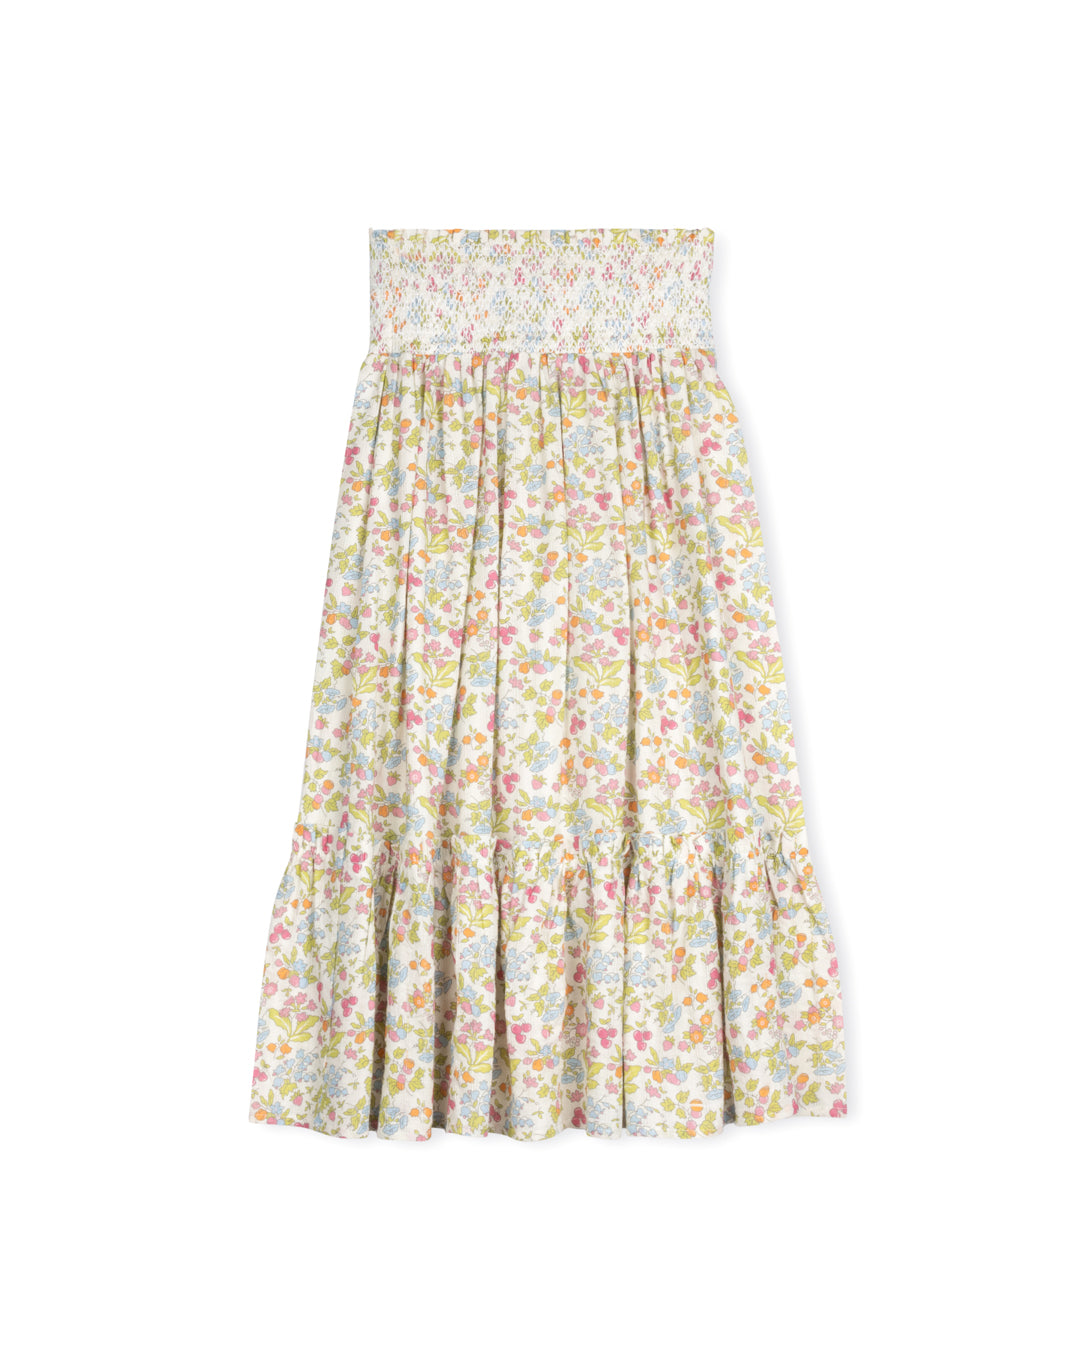 TUSTELLO FLORAL EMBROIDERED SMOCKED TIERED SKIRT